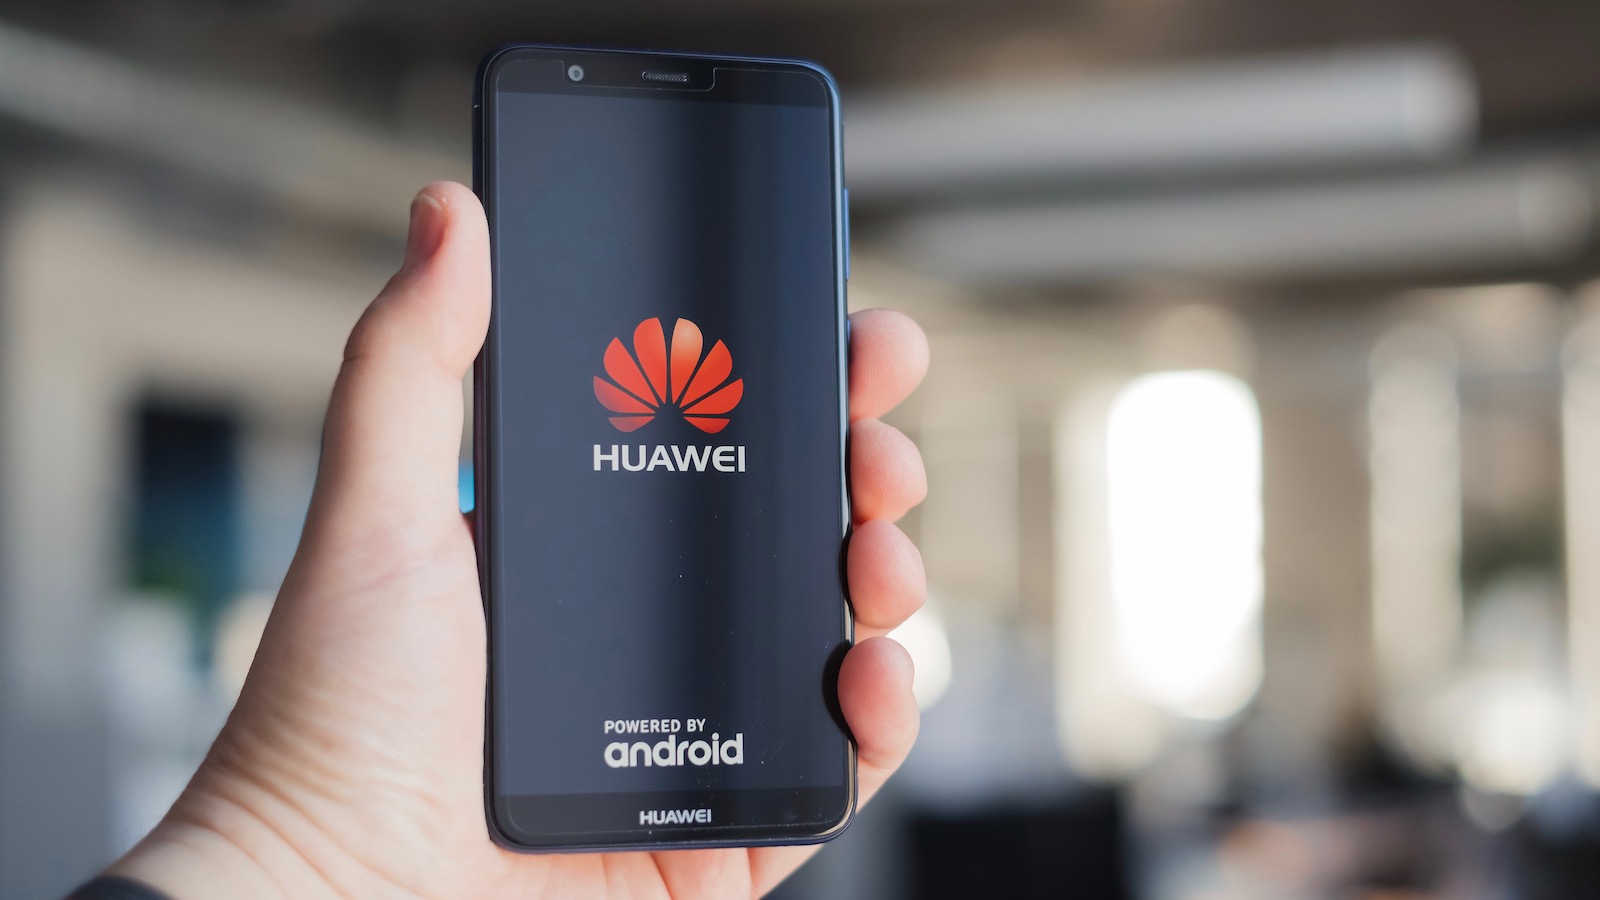 How I can recover my Huawei id